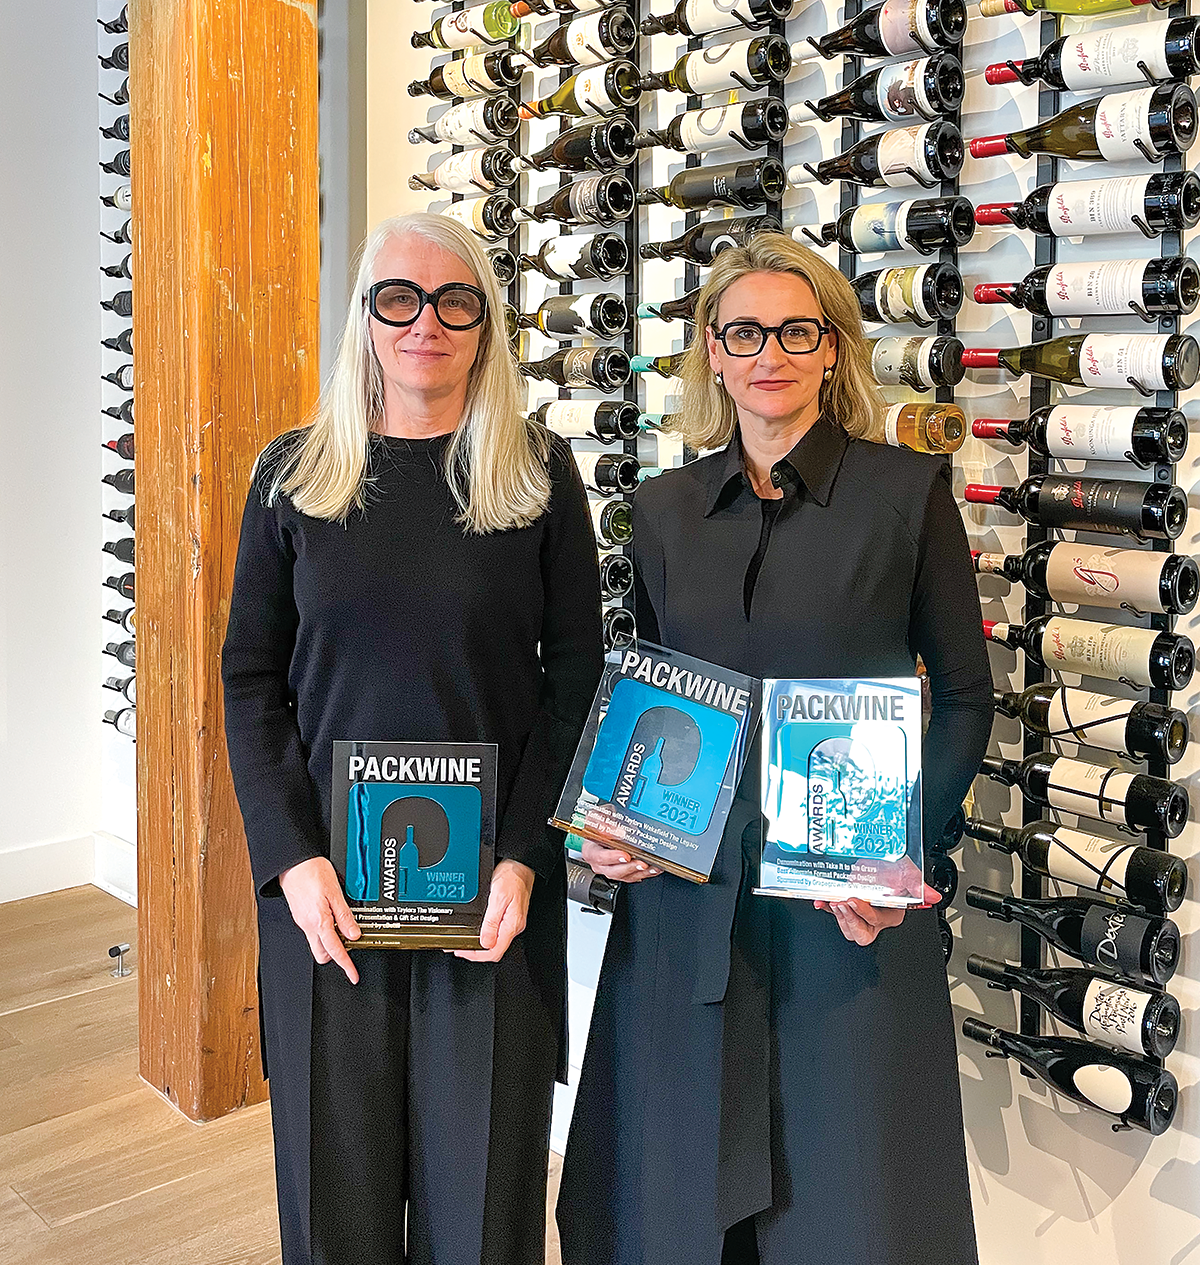 Denomination's Global Creative Director Margaret Nolan (left) and CEO Rowena Curlewis (right) from Denomination, with their three PACKWINE Design Awards trophies.